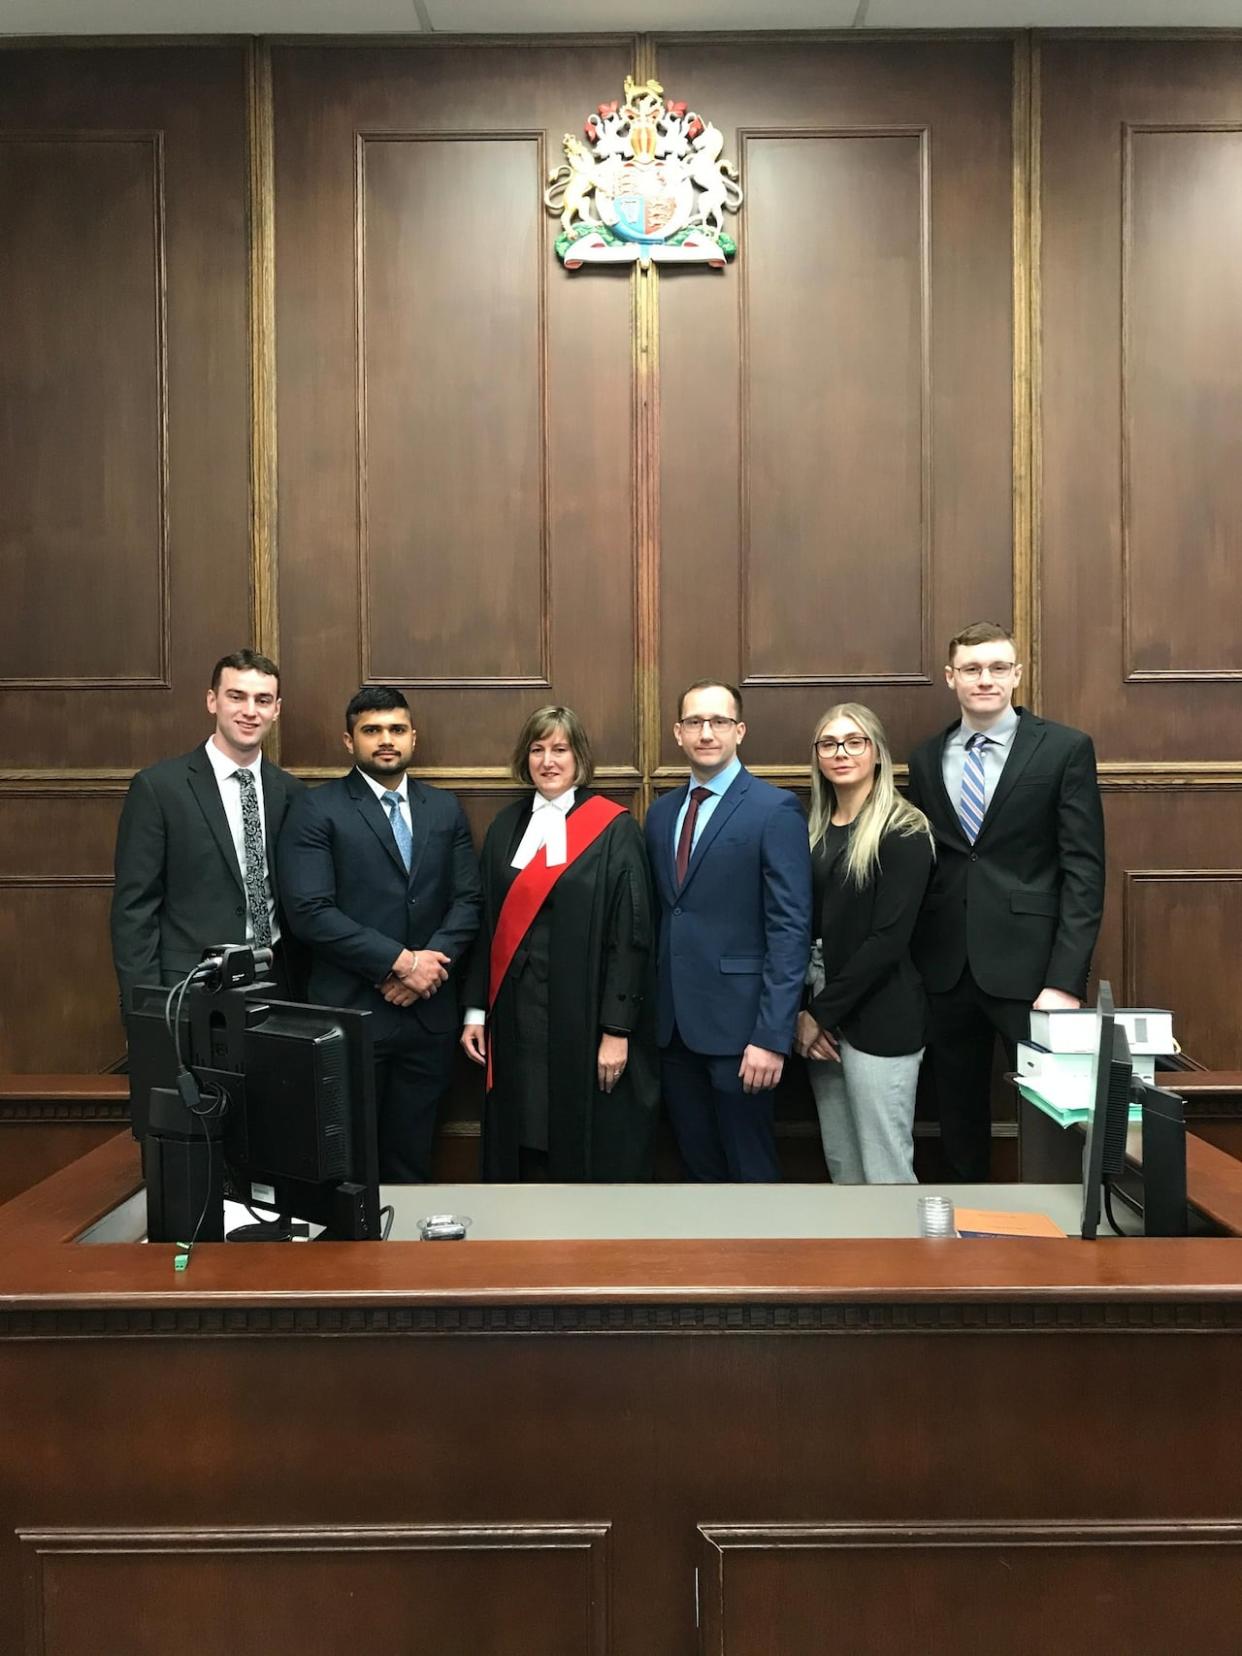 Shankey Dahiya, second from left, was sworn in as a police officer with the Greater Sudbury Police Service on March 27 along with Constables Cameron Lamour, Luc Paquin, Samantha Brosseau and Zachary Hosken. (Greater Sudbury Police Service/Facebook - image credit)